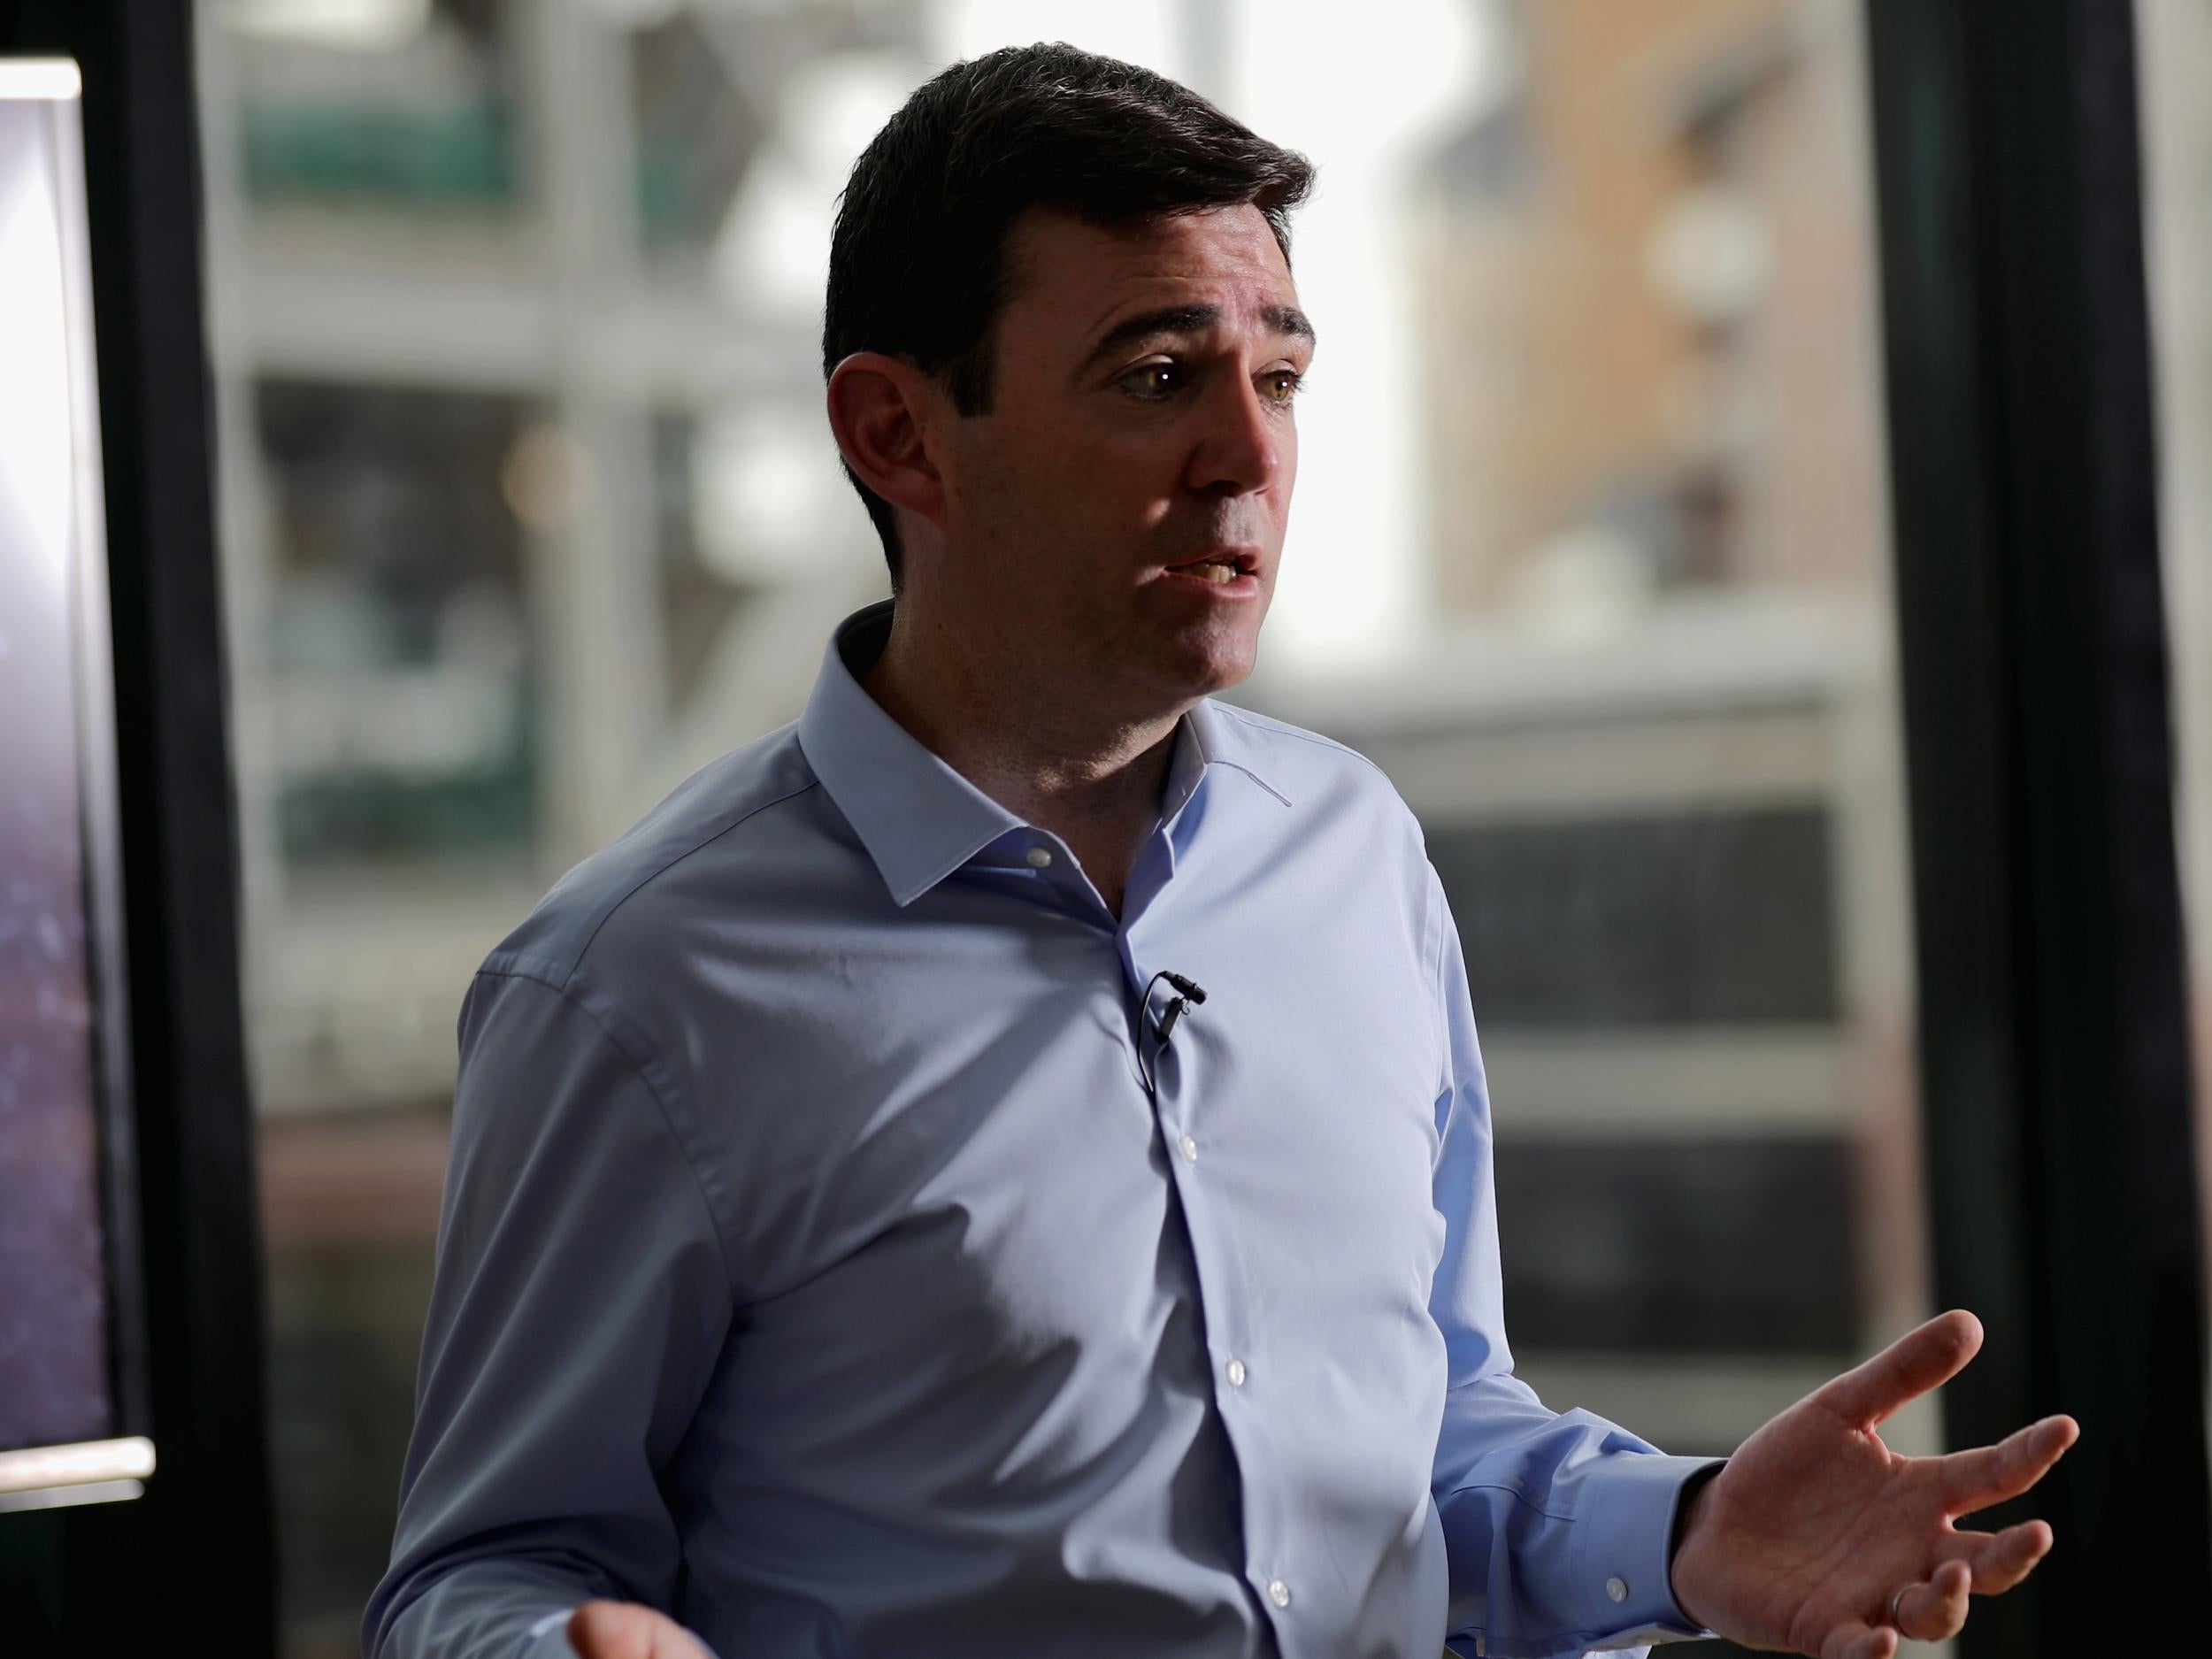 Andy Burnham, Mayor of Greater Manchester, wants to make sure that no child is left without the resources to learn